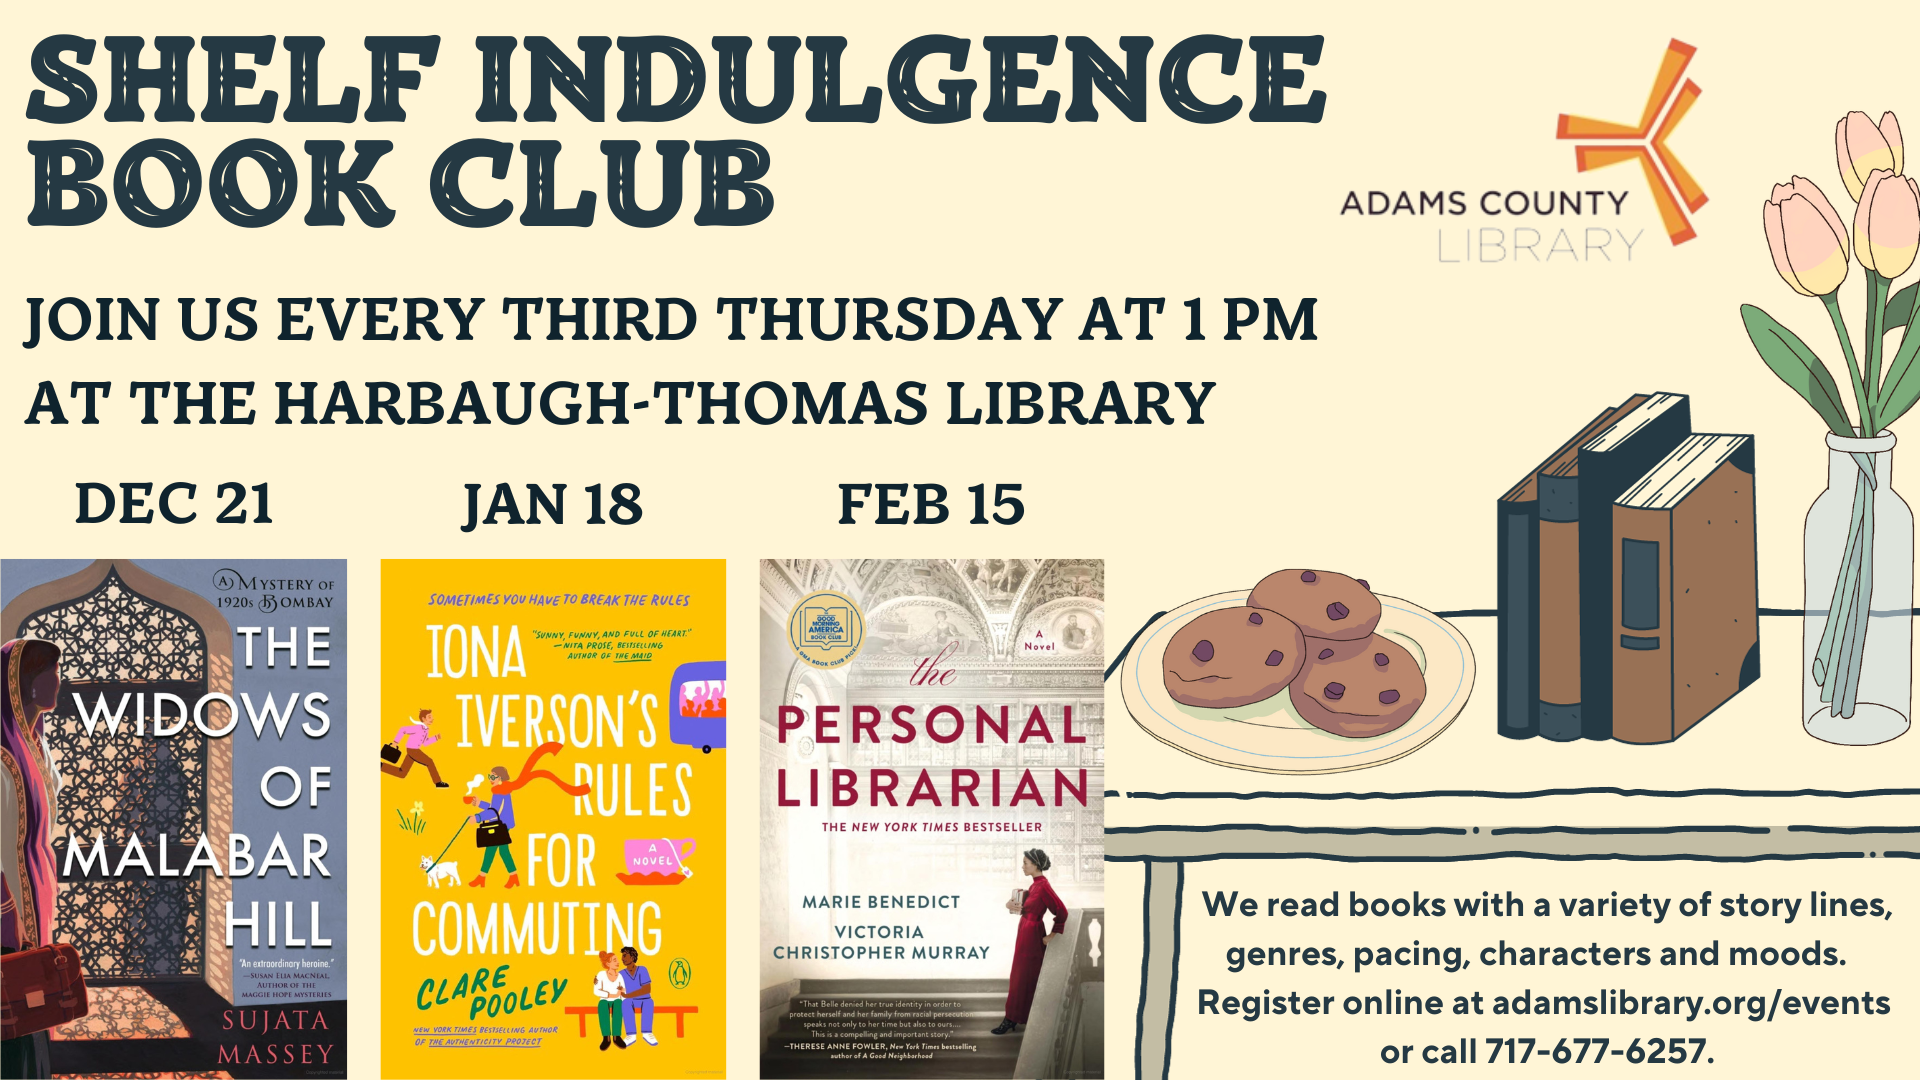 Join us every third Thursday at 1pm at the Harbaugh Thomas Library for the Shelf Indulgence Book Club. 